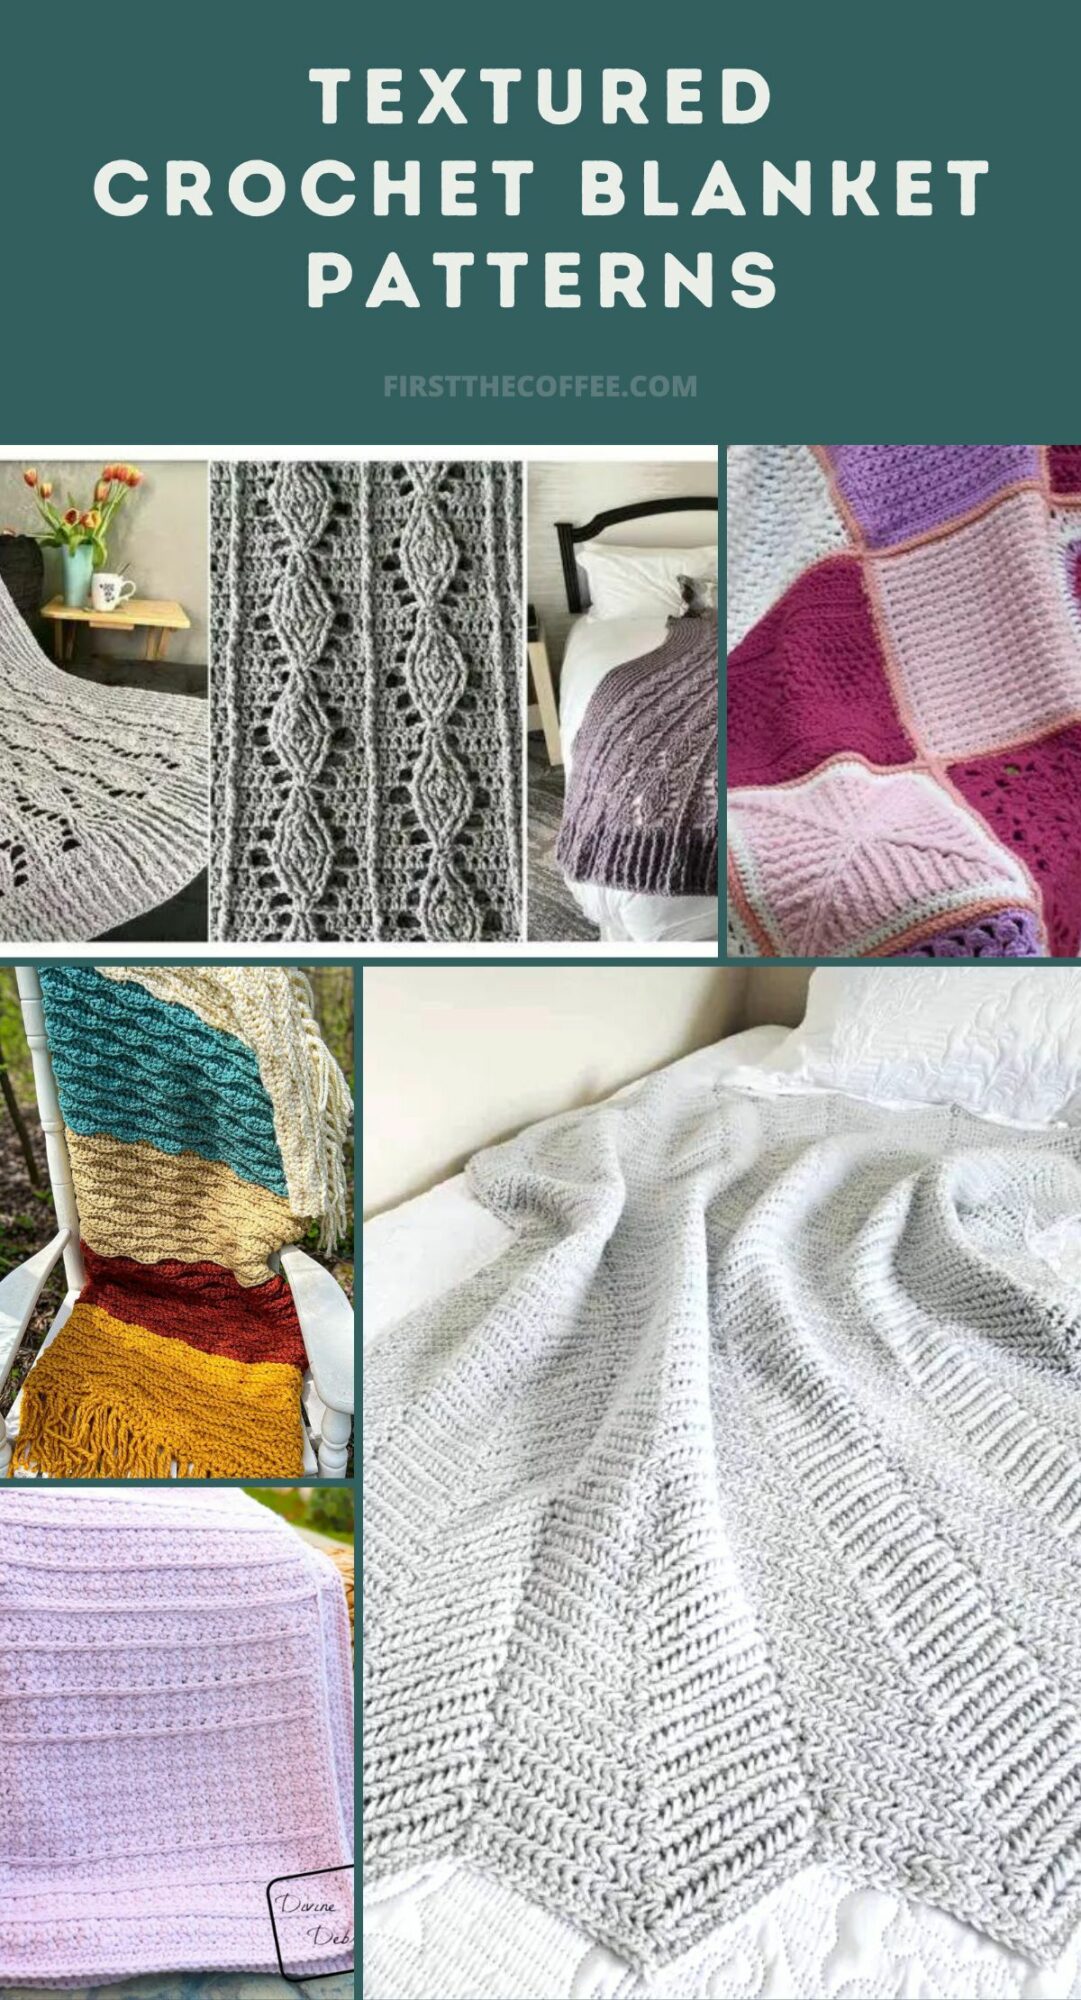 Get Hooked on These Textured Crochet Blanket Patterns